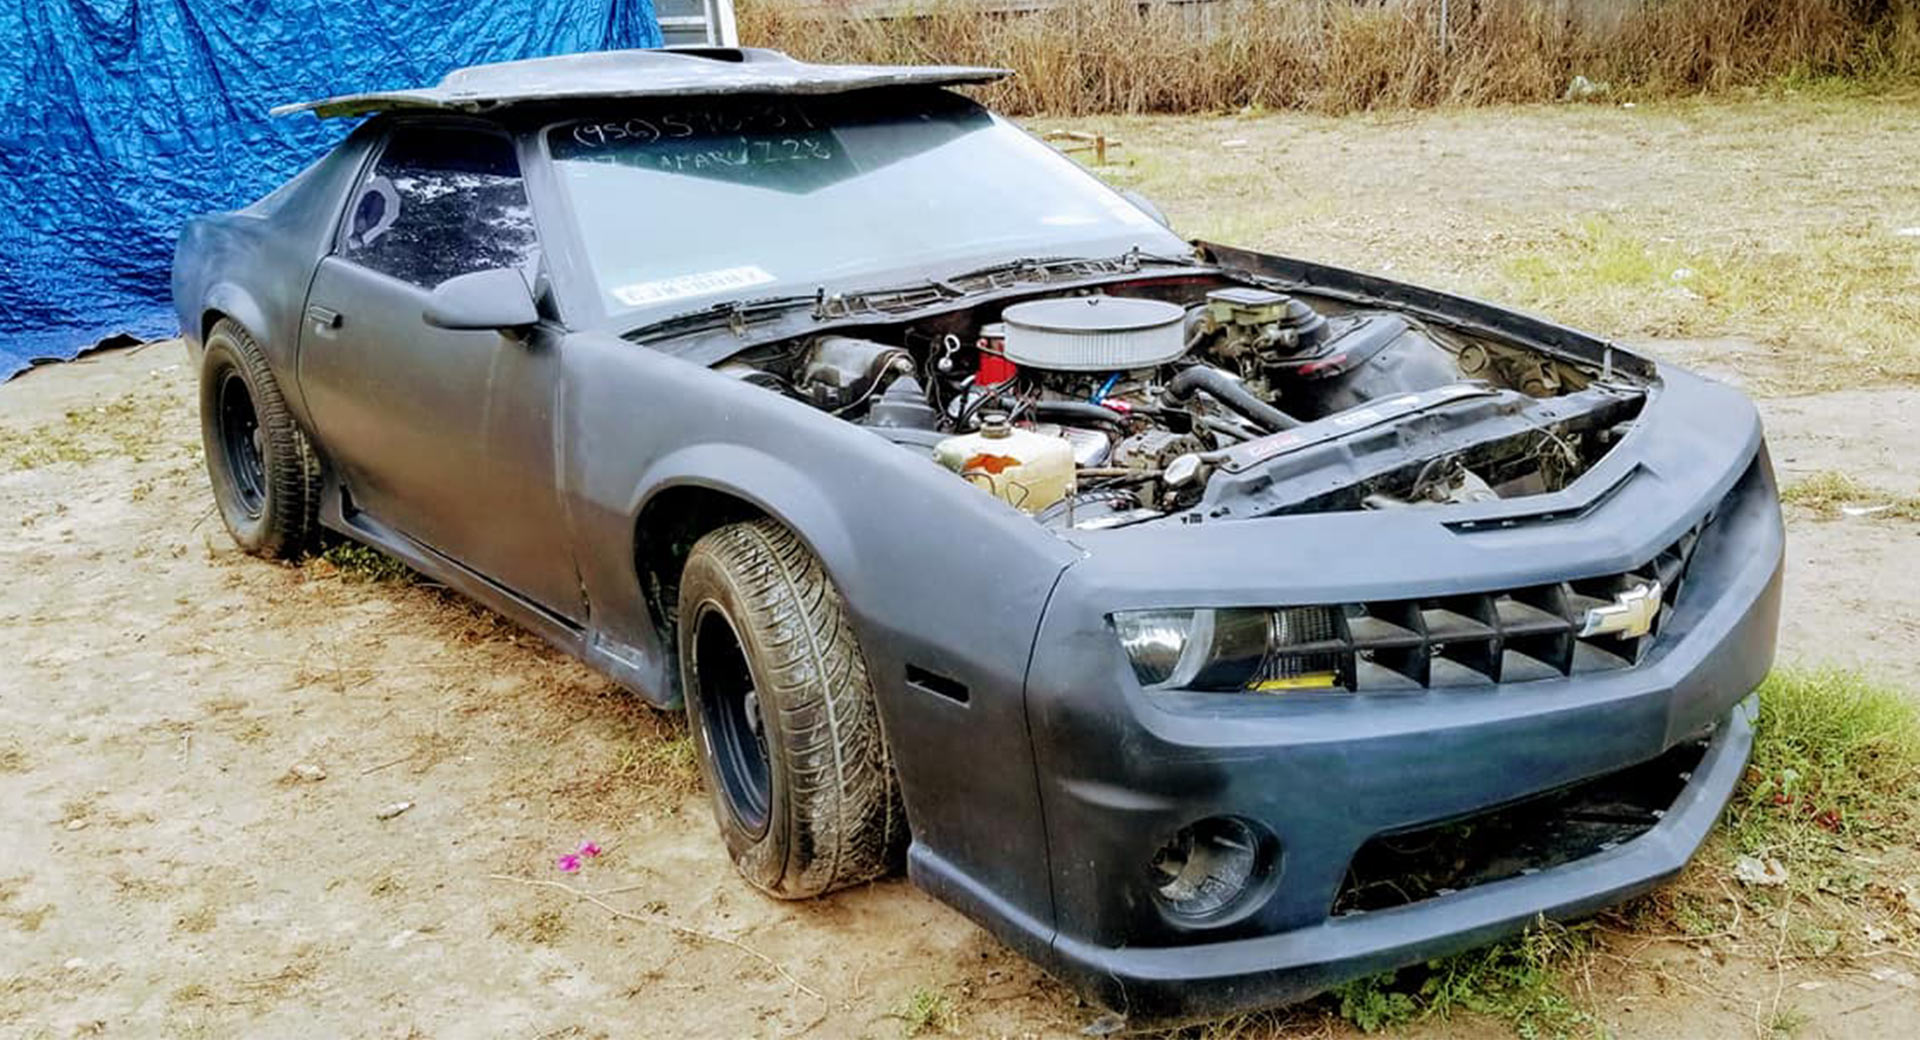 Restowrong 1987 Chevy Camaro With 5th-Gen Camaro Front And Rear Ends |  Carscoops